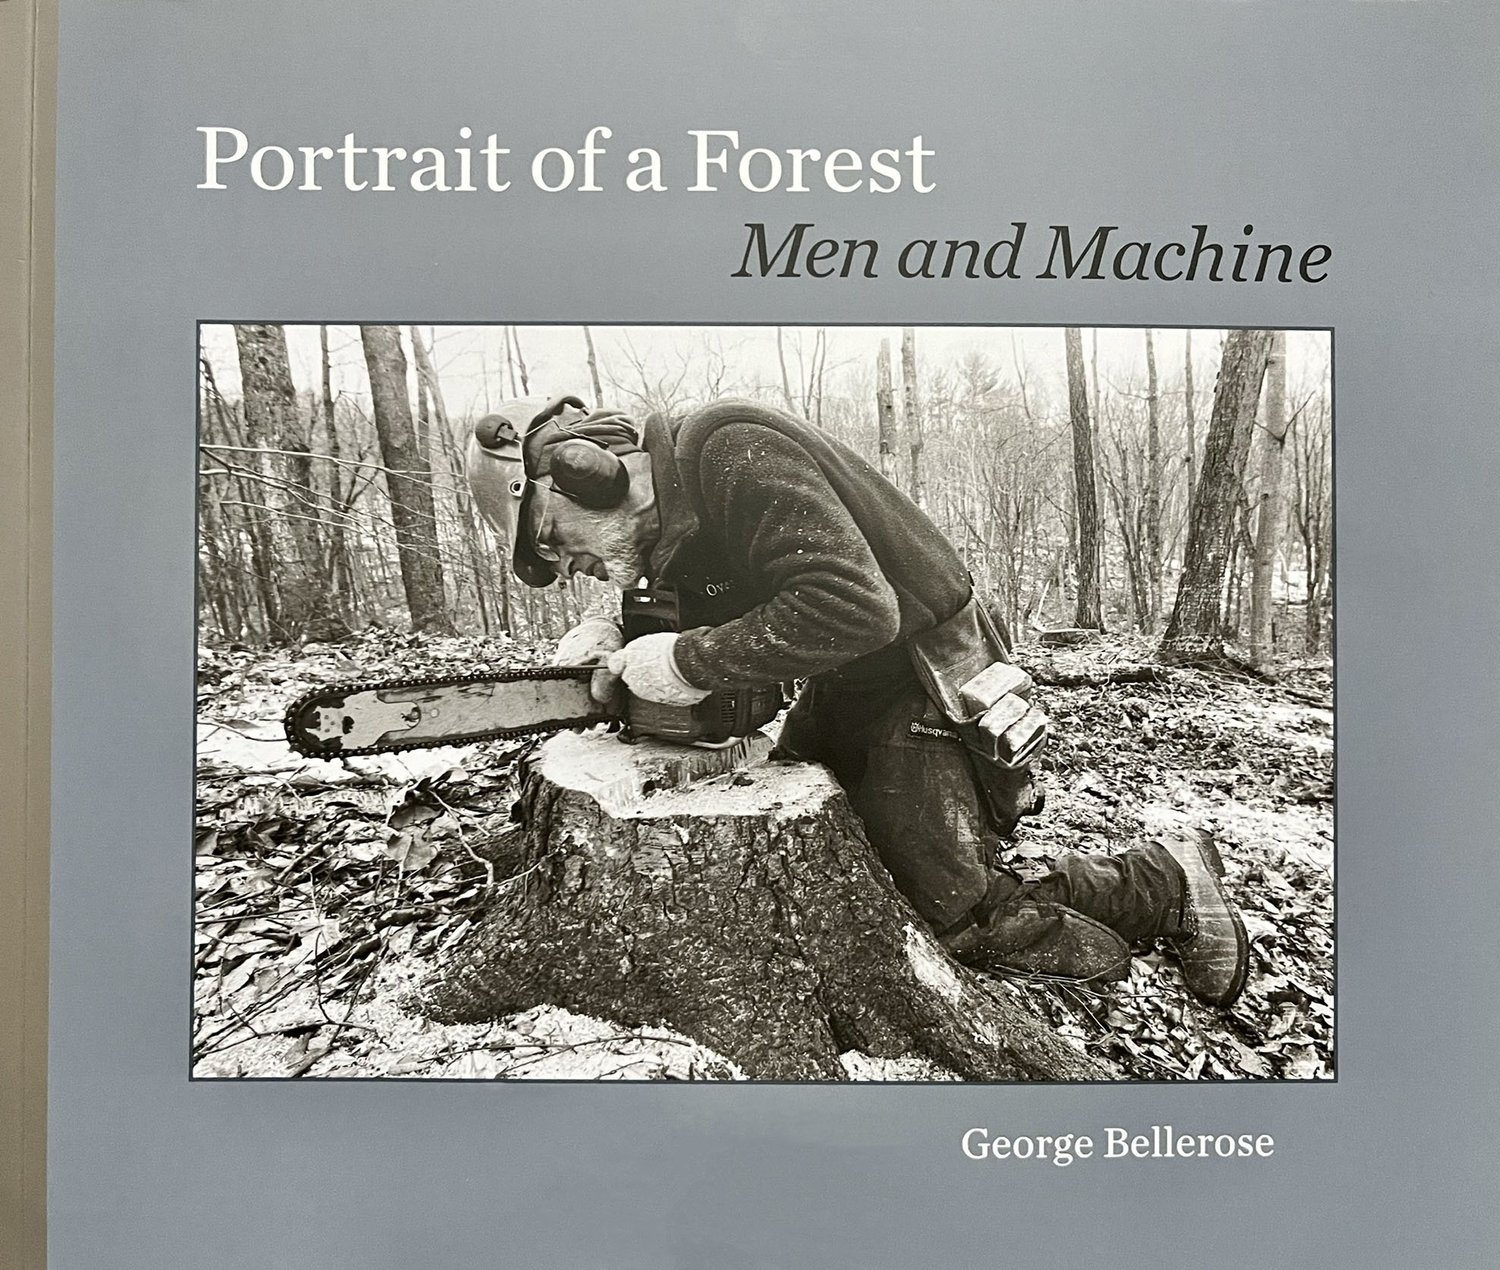 George Bellerose Discusses His New Book — Portrait of a Forest: Men and Machine